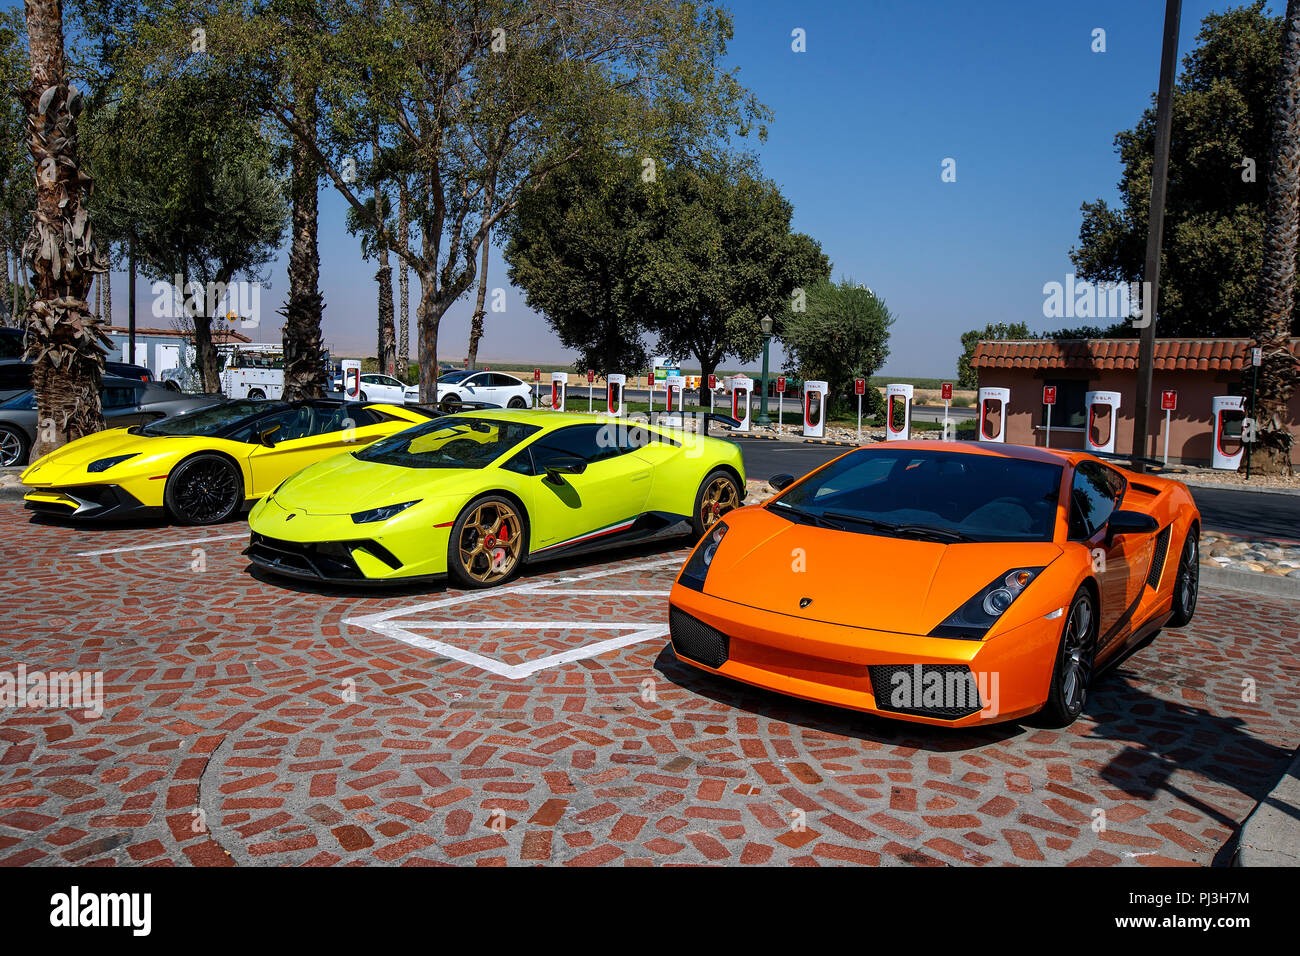 Three Lamborghini sports cars parked in front of a Tesla Super Charger station, Harris Ranch (3O8), Coalinga, California, United States of America Stock Photo